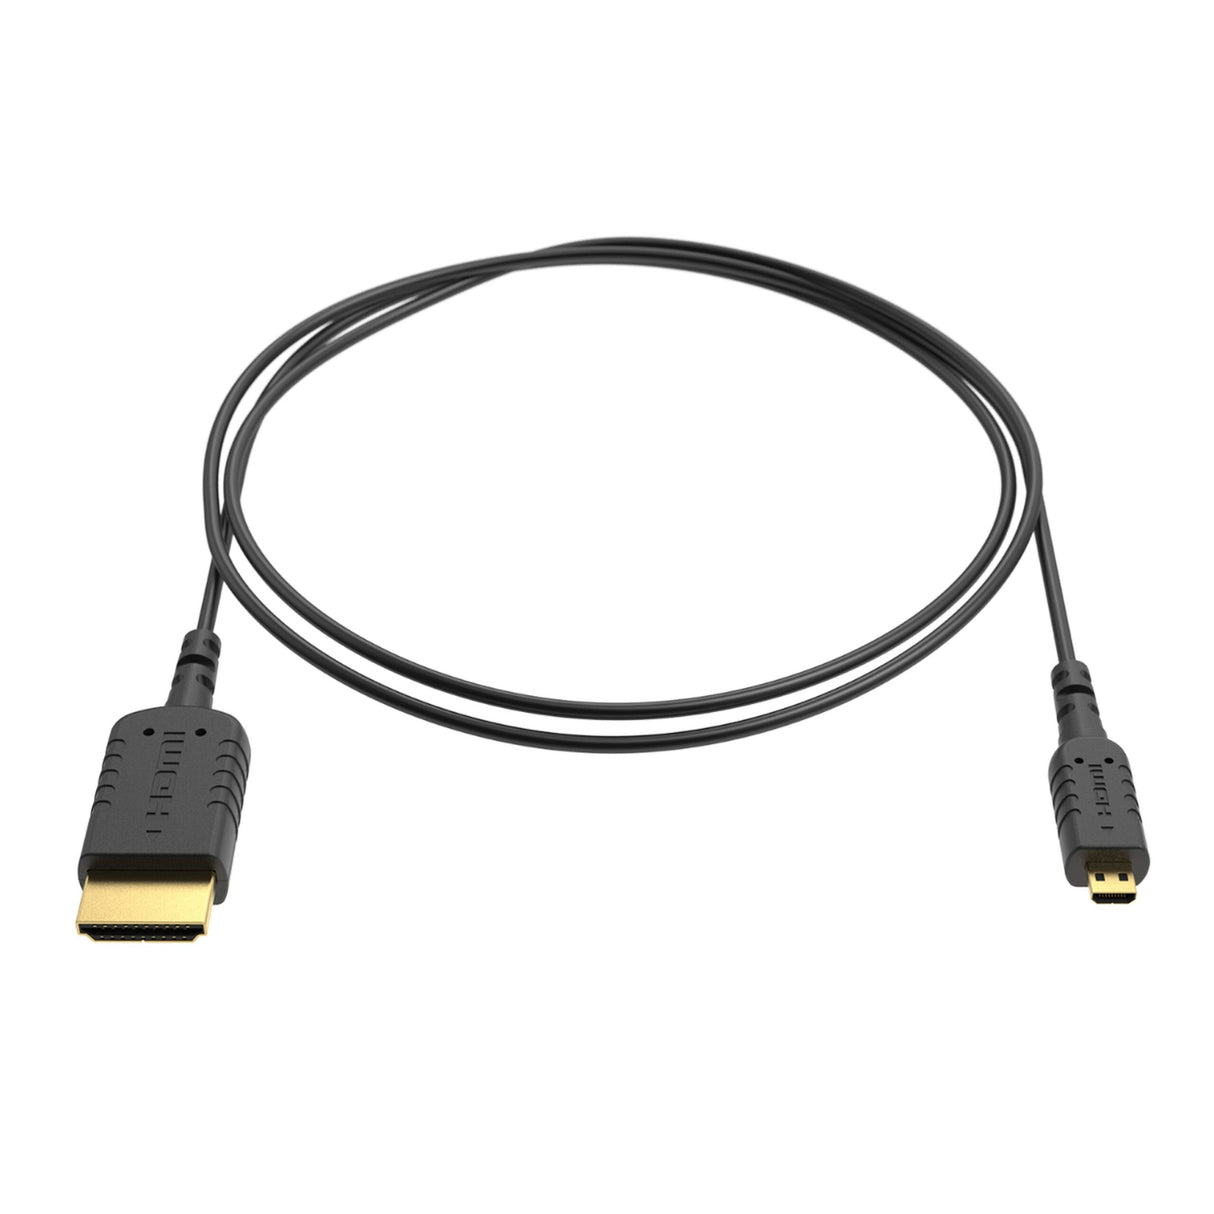 8Sinn eXtraThin HDMI Micro to HDMI Cable, 80 Centimeters